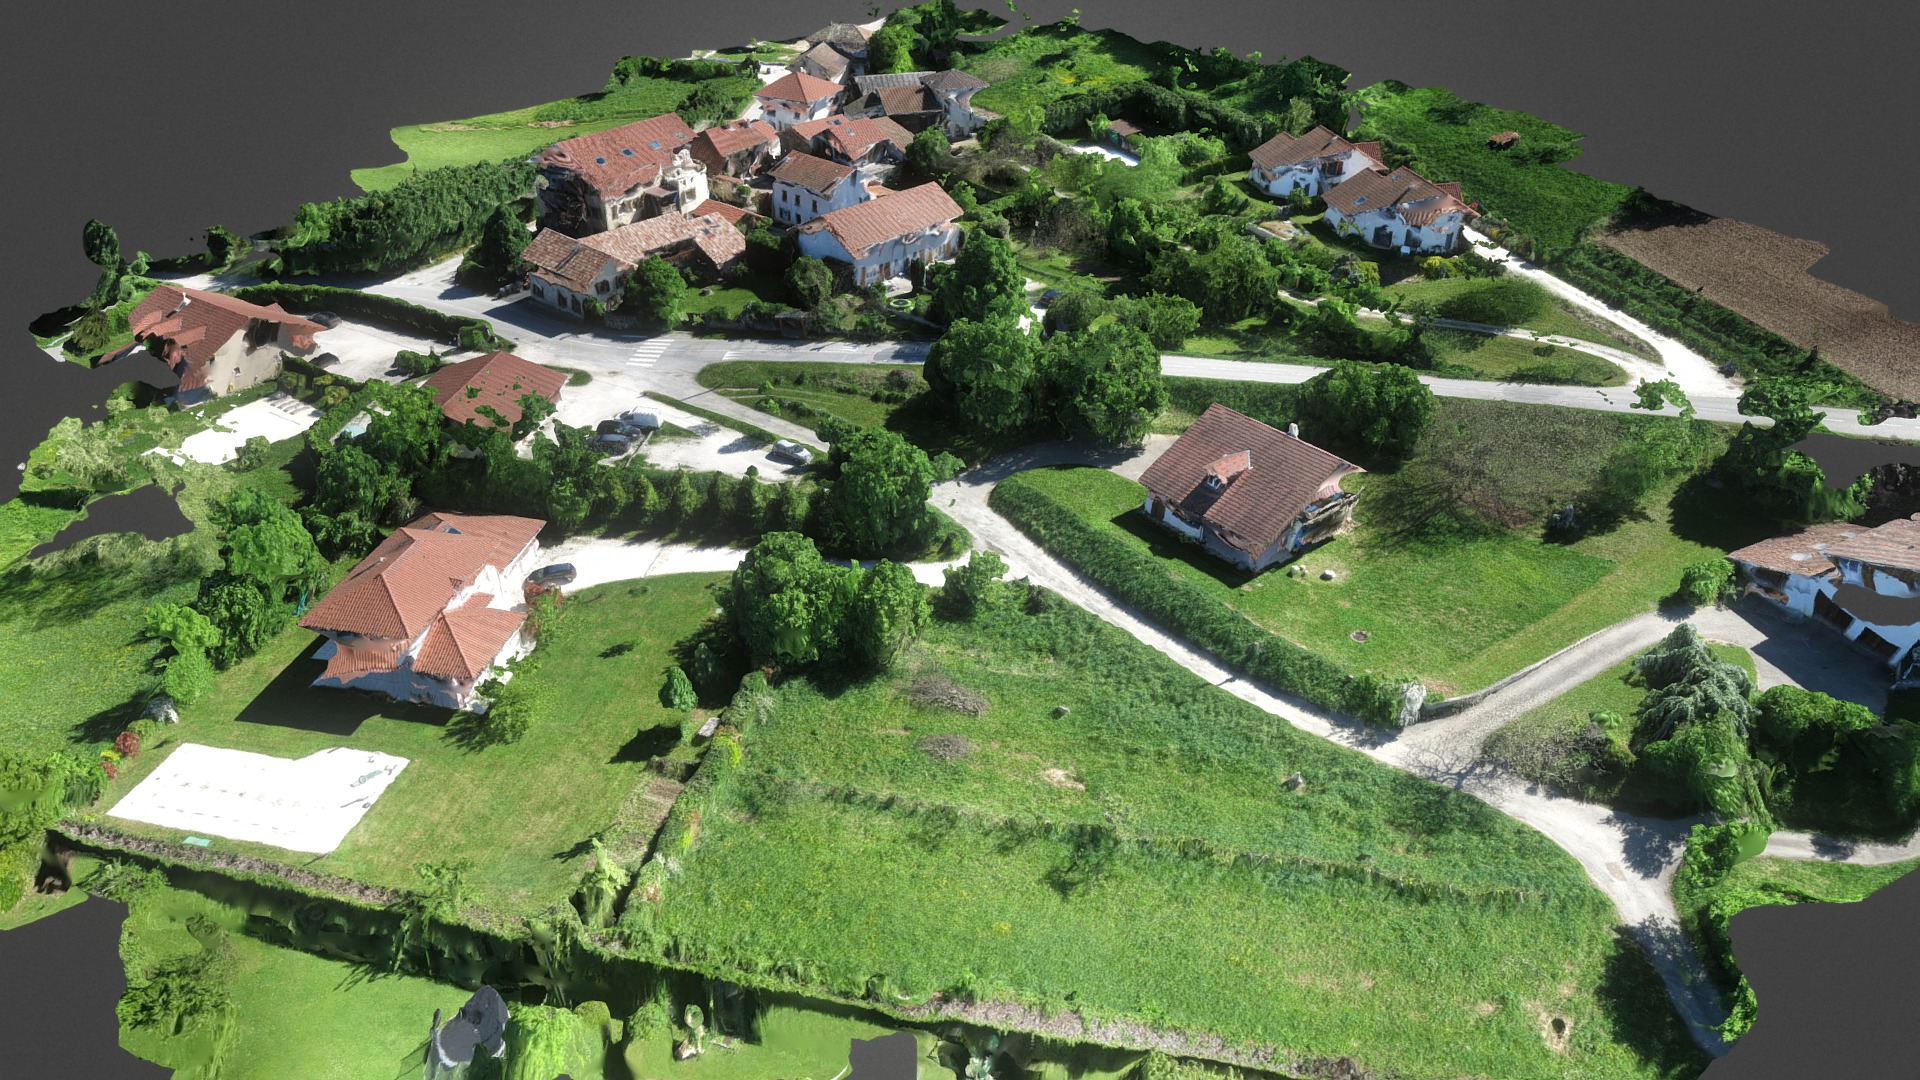 3D model Hamlet Of "La Ville", Venon, France - This is a 3D model of the Hamlet Of "La Ville", Venon, France. The 3D model is about a large green landscape with houses and trees.